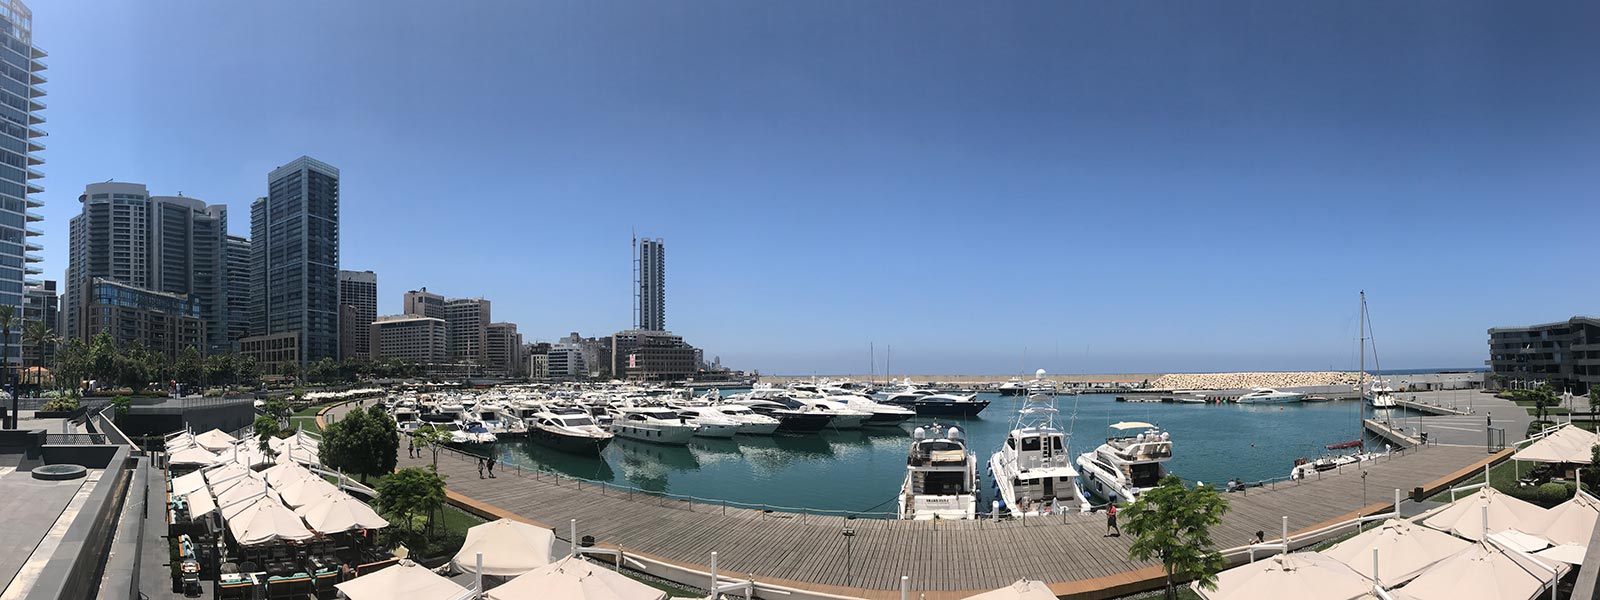 Harbor with many boats in Beirut, Lebanon. Lebanon & Cyprus, country 100!!!